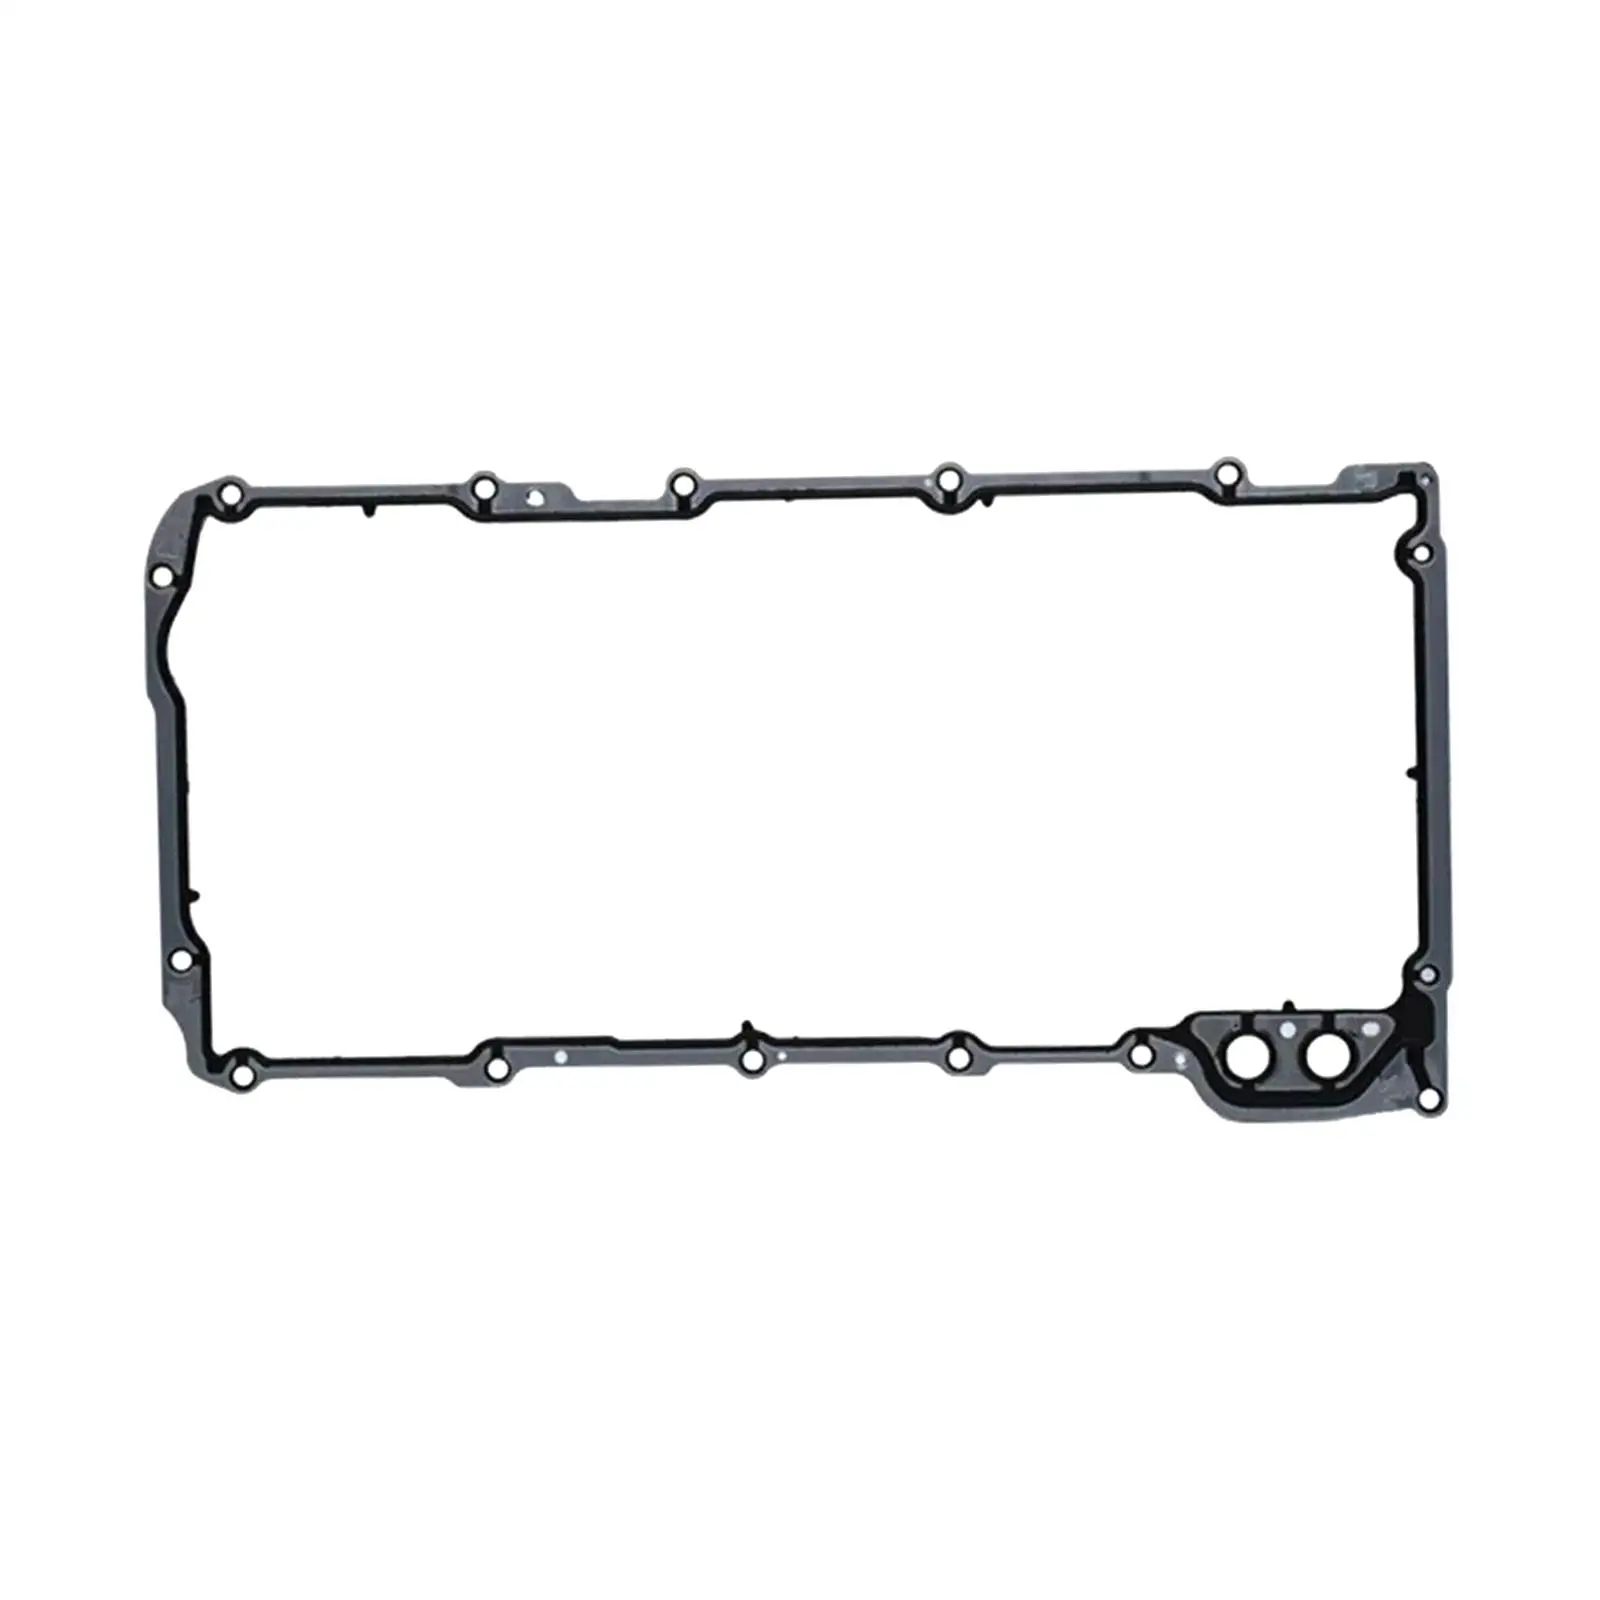 Cylinder Engine Oil Pan Gasket 12612350 for Hummer Replaces Premium Durable